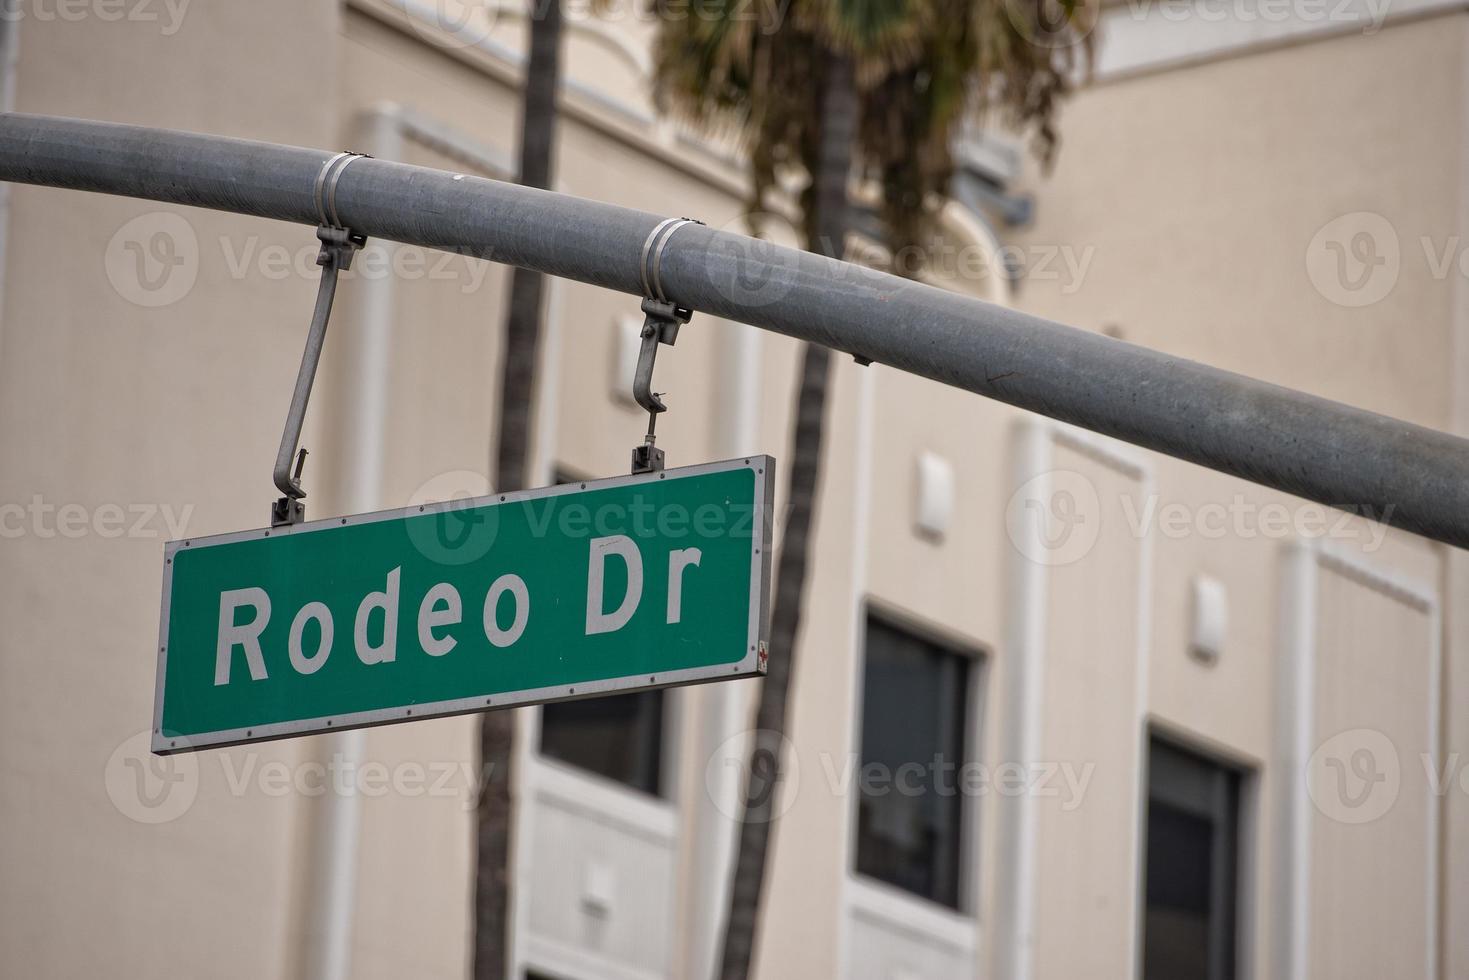 LA Hollywood Rodeo Drive sign photo